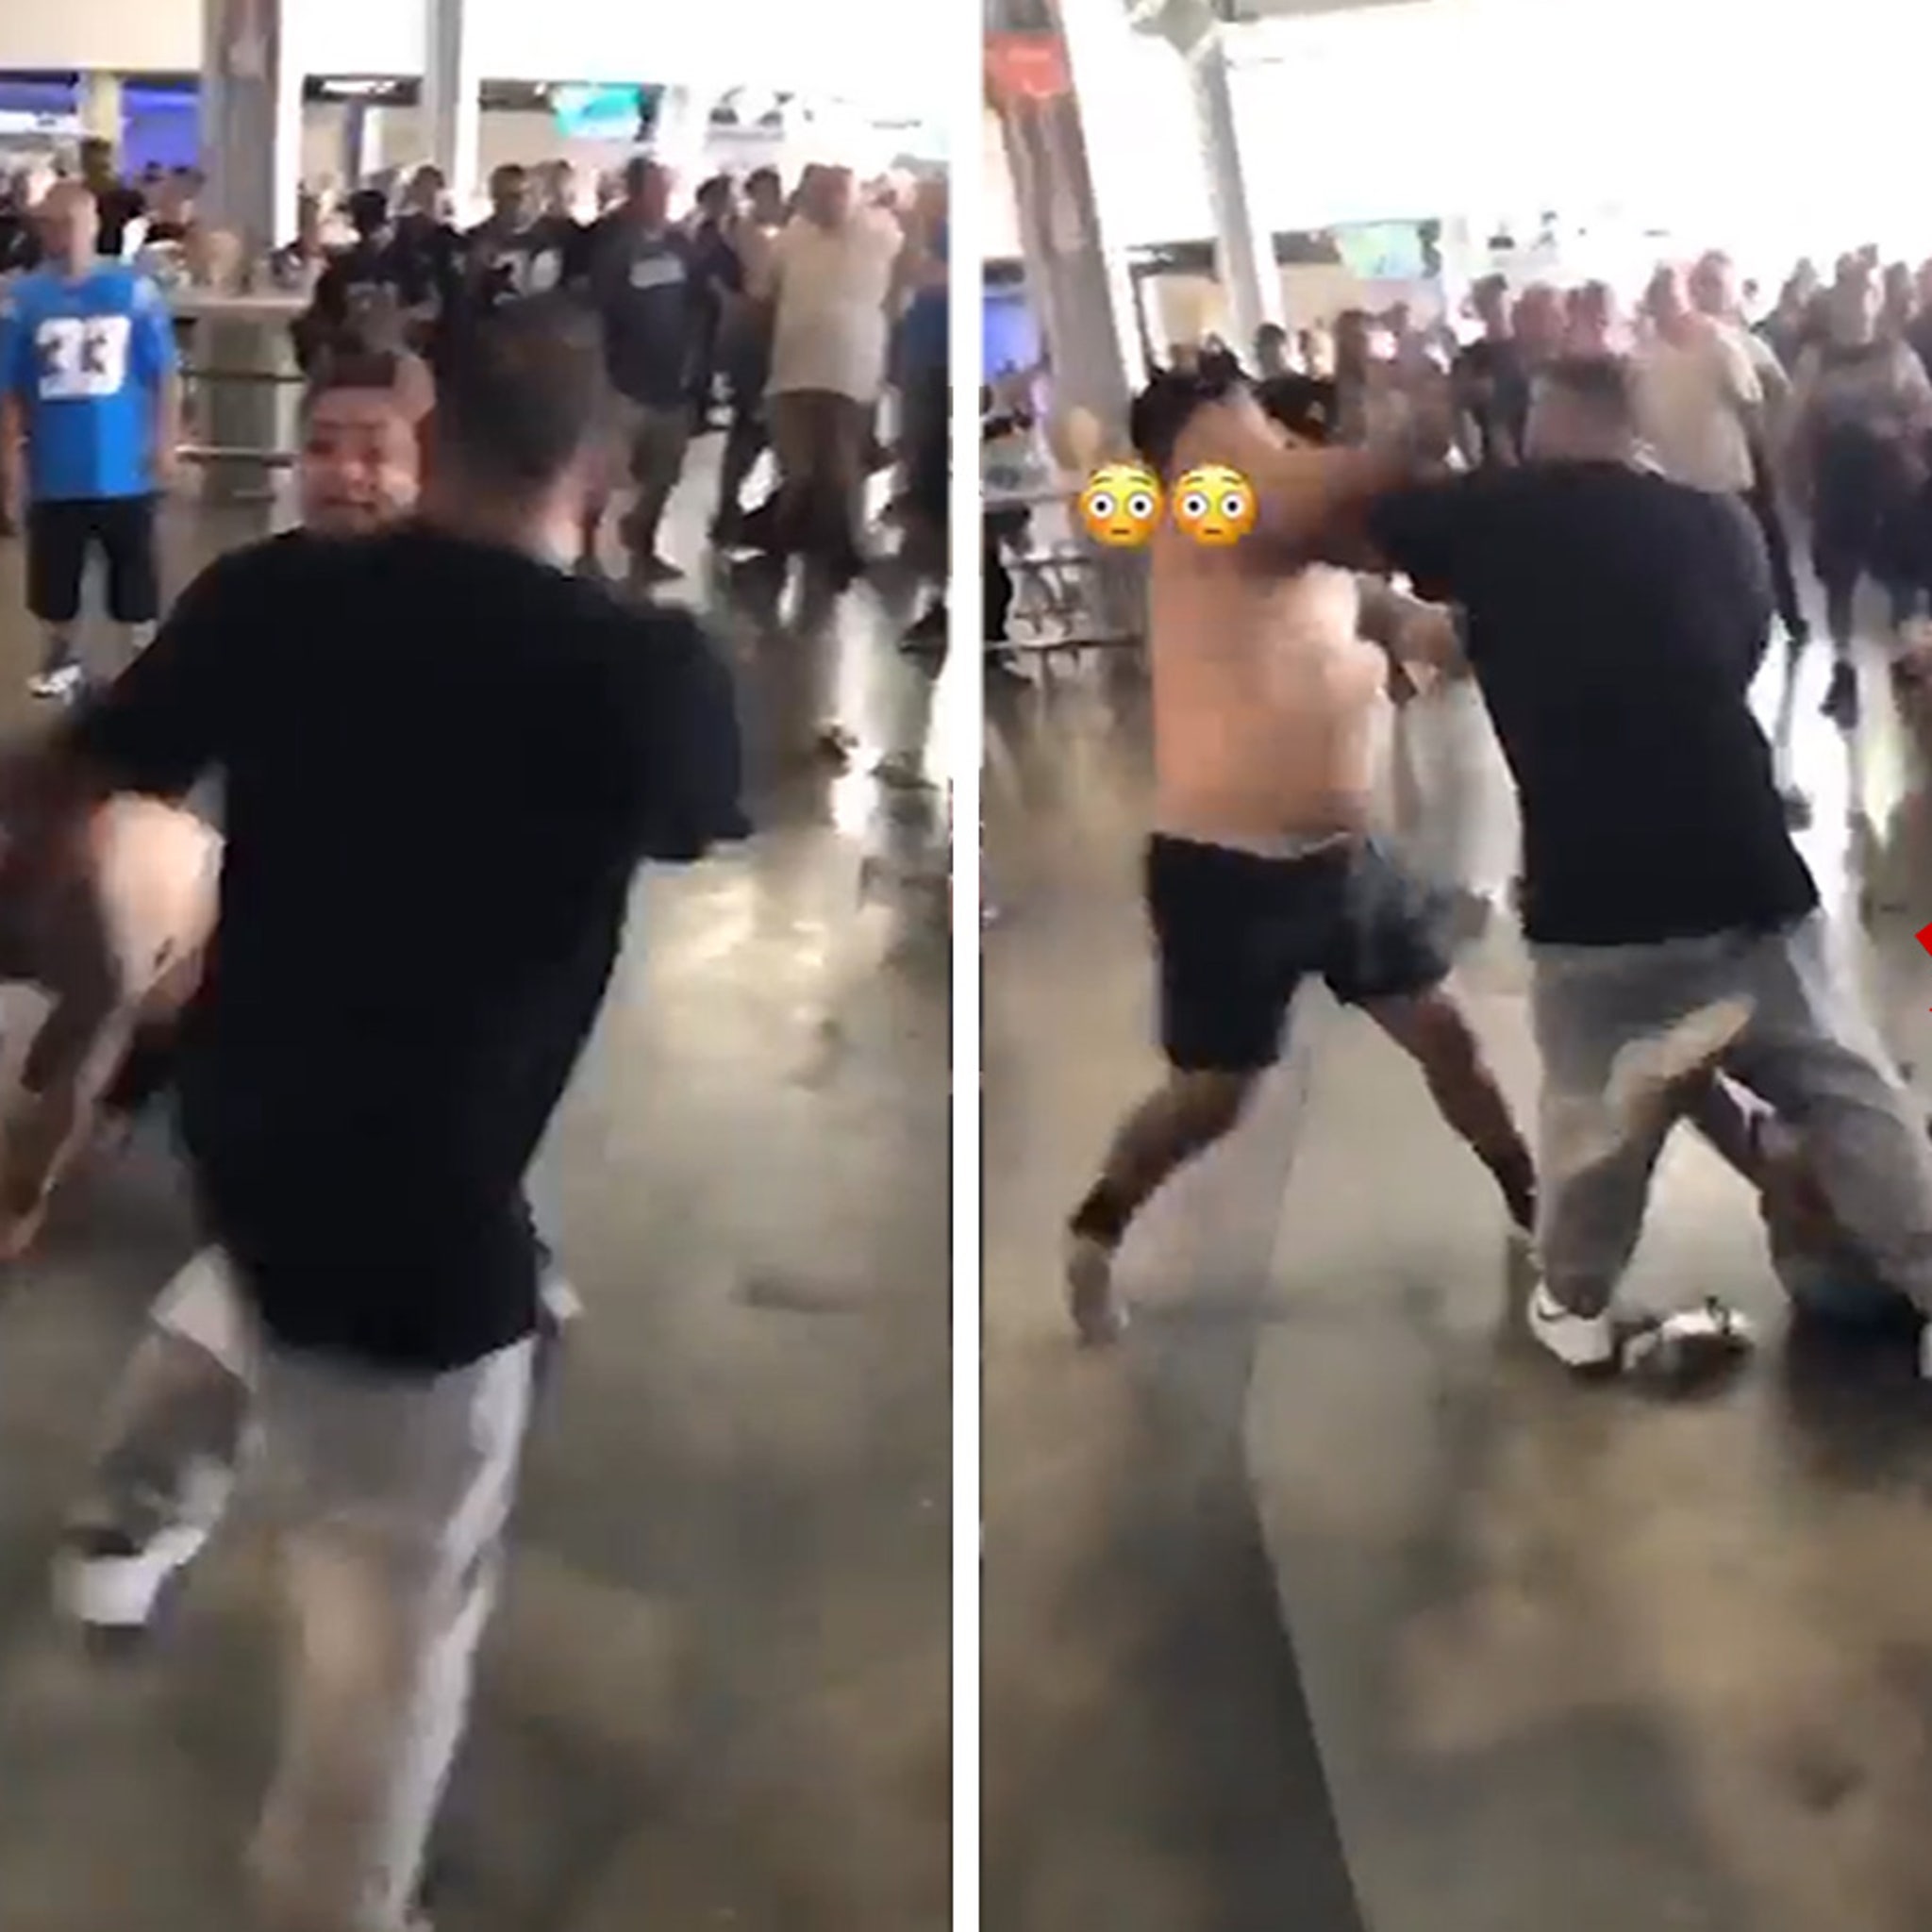 Man sent tumbling down stairs during fight at Chargers vs Raiders